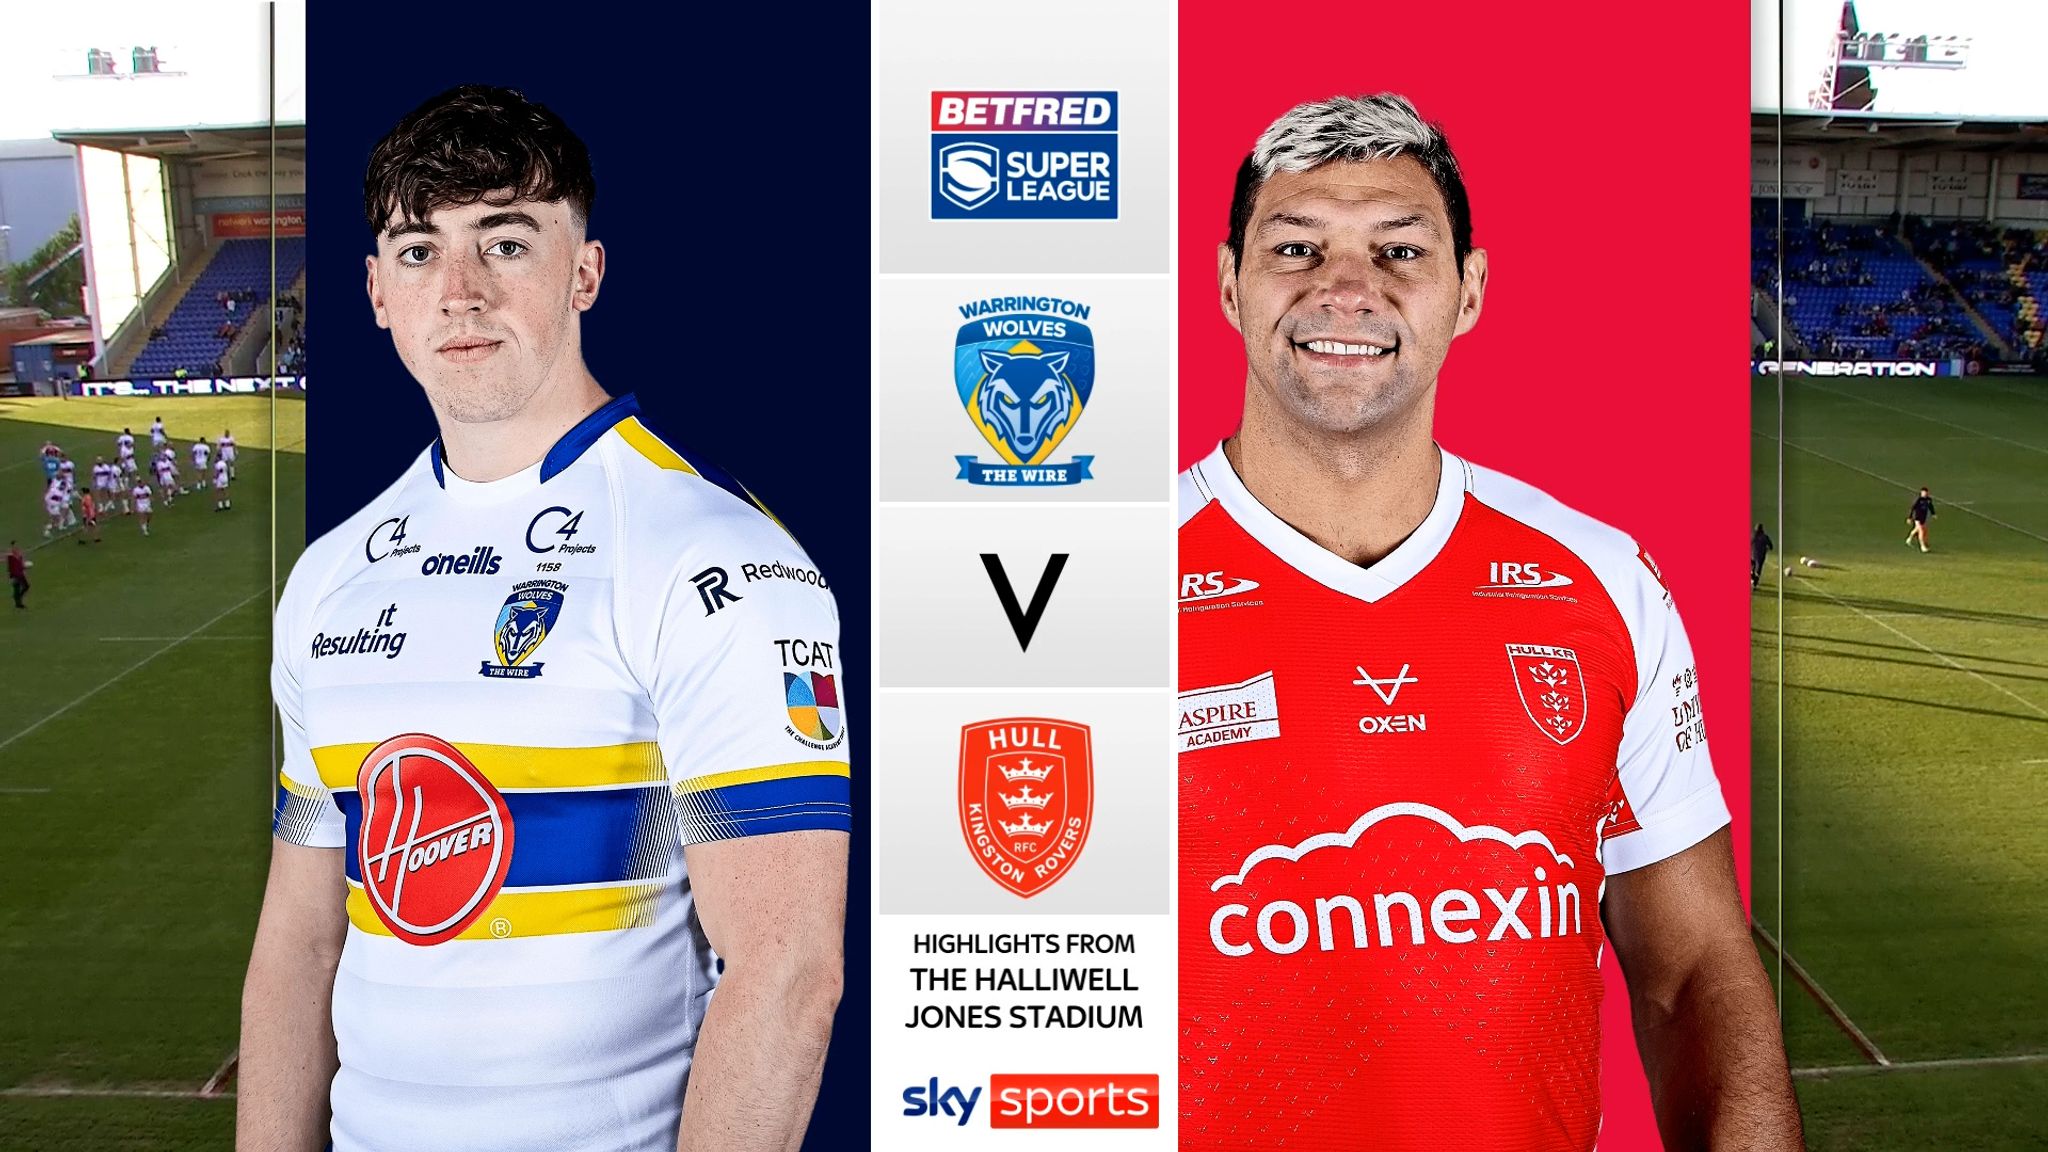 Warrington Wolves 21-14 Hull Kingston Rovers Super League highlights Video Watch TV Show Sky Sports